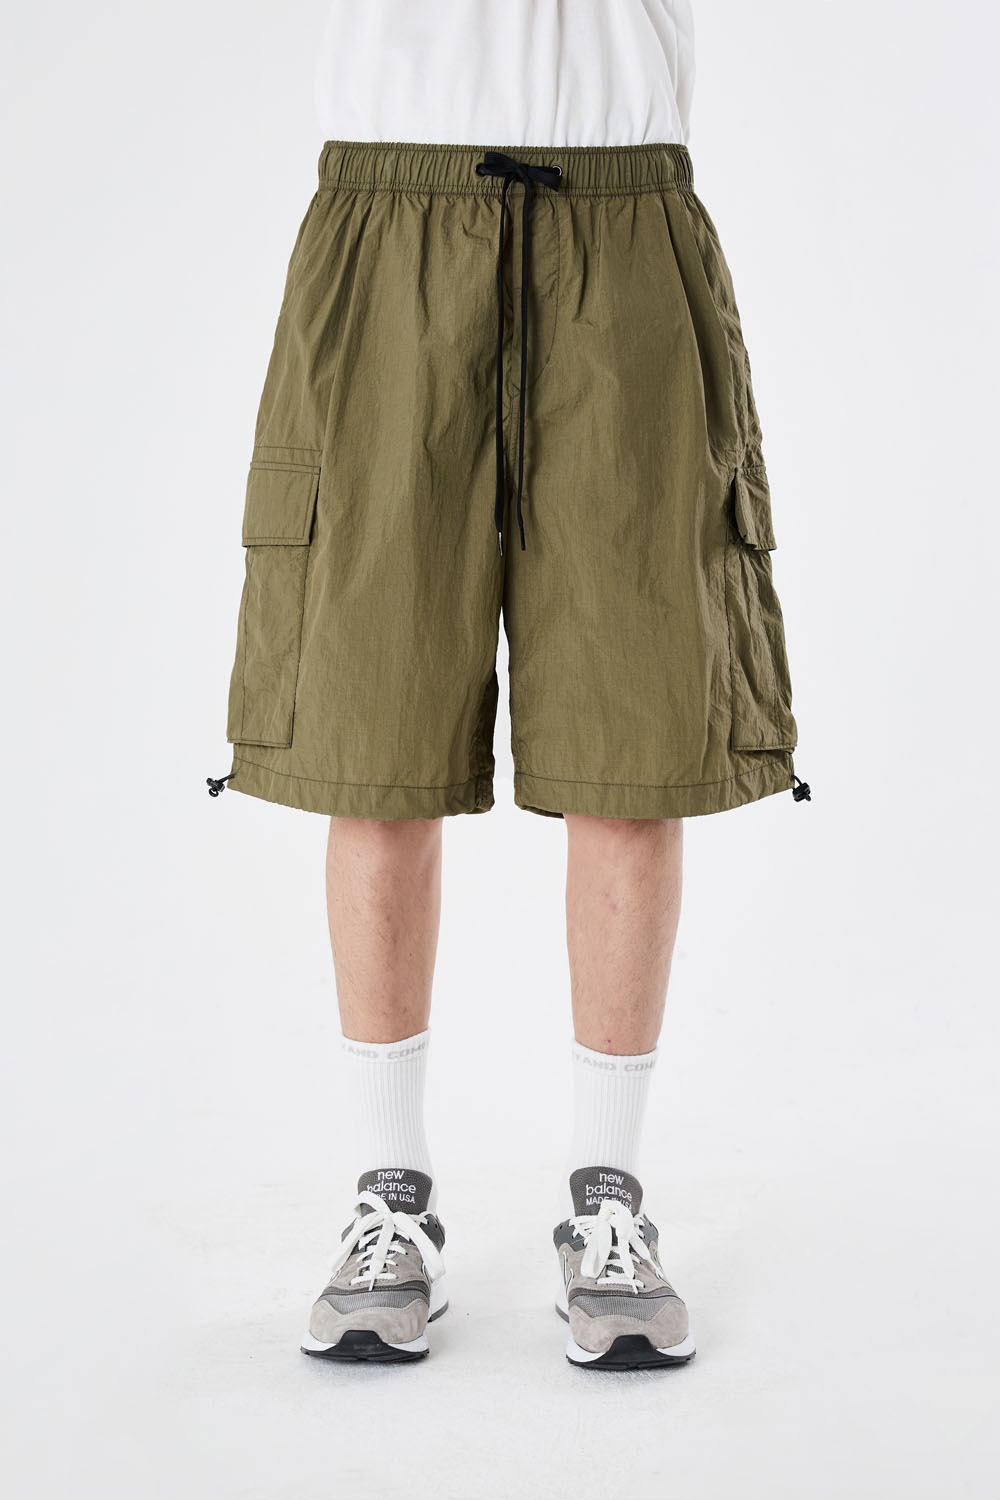 Over Mil 6p Shorts-Olive Ripstop